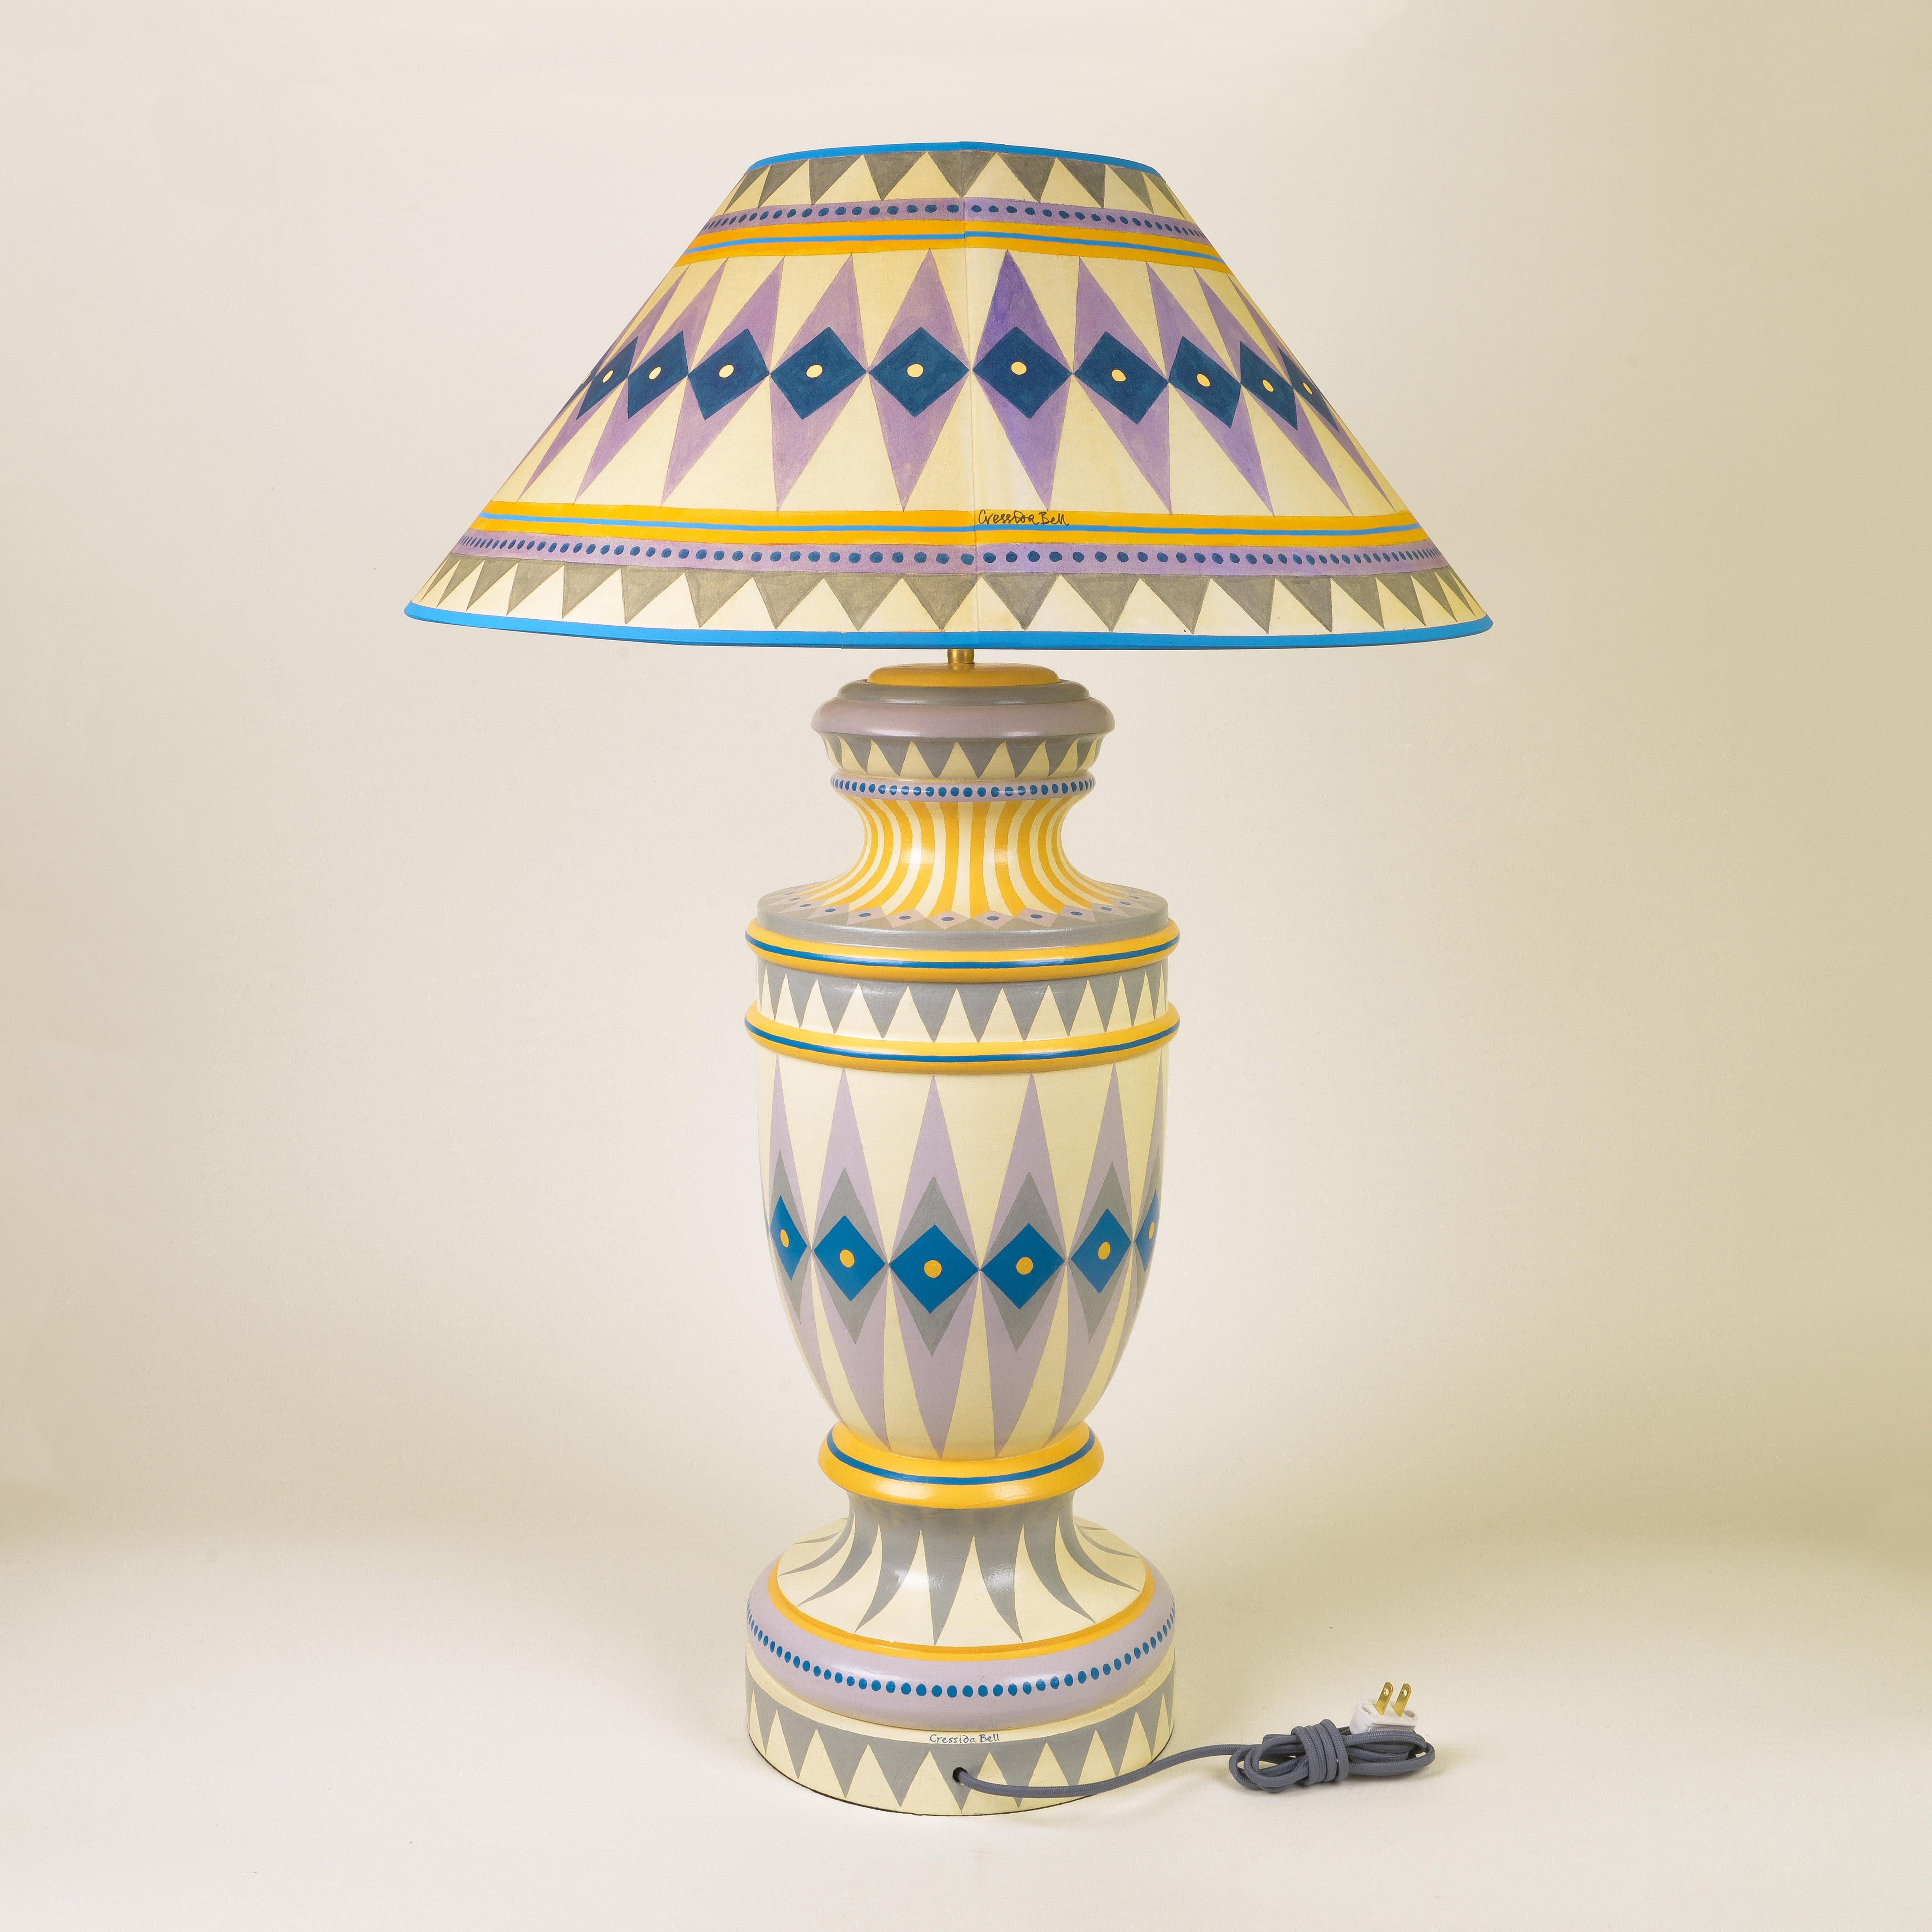 Brass Cressida Bell - 'Harlequin' Table Lamp For Sale